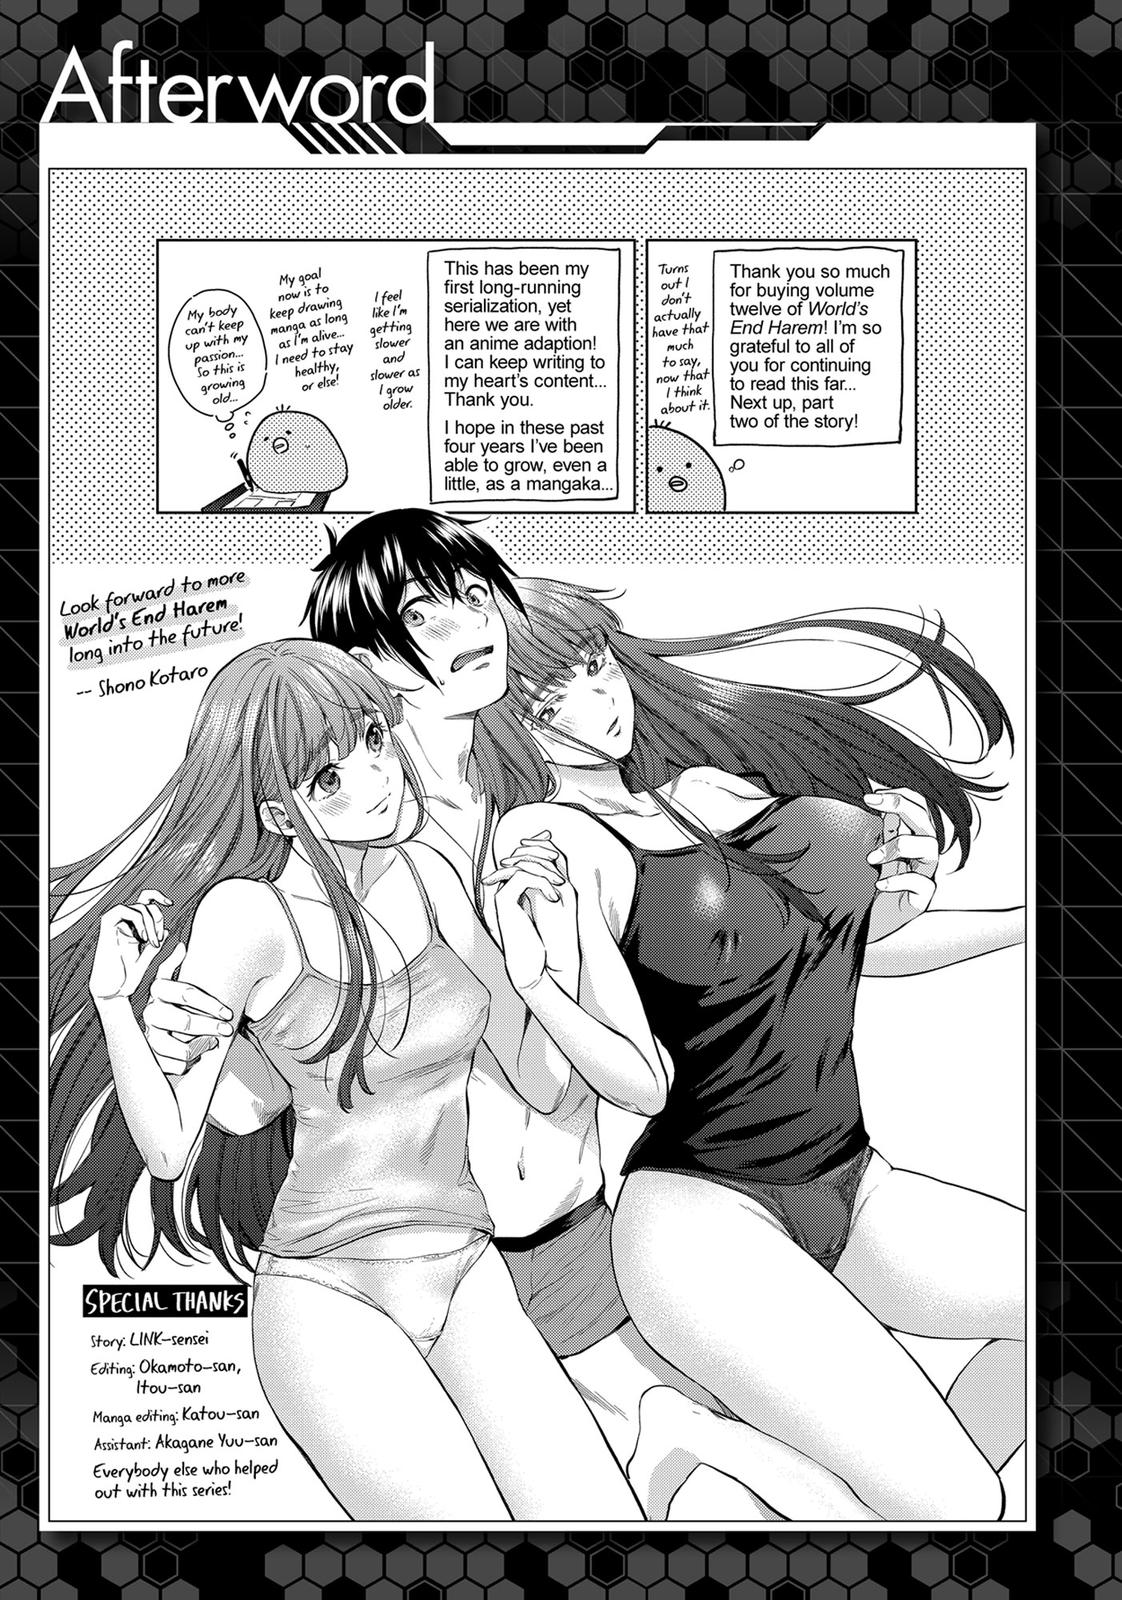 World's End Harem, Chapter 85  TcbScans Net - TCBscans - Free Manga Online  in High Quality